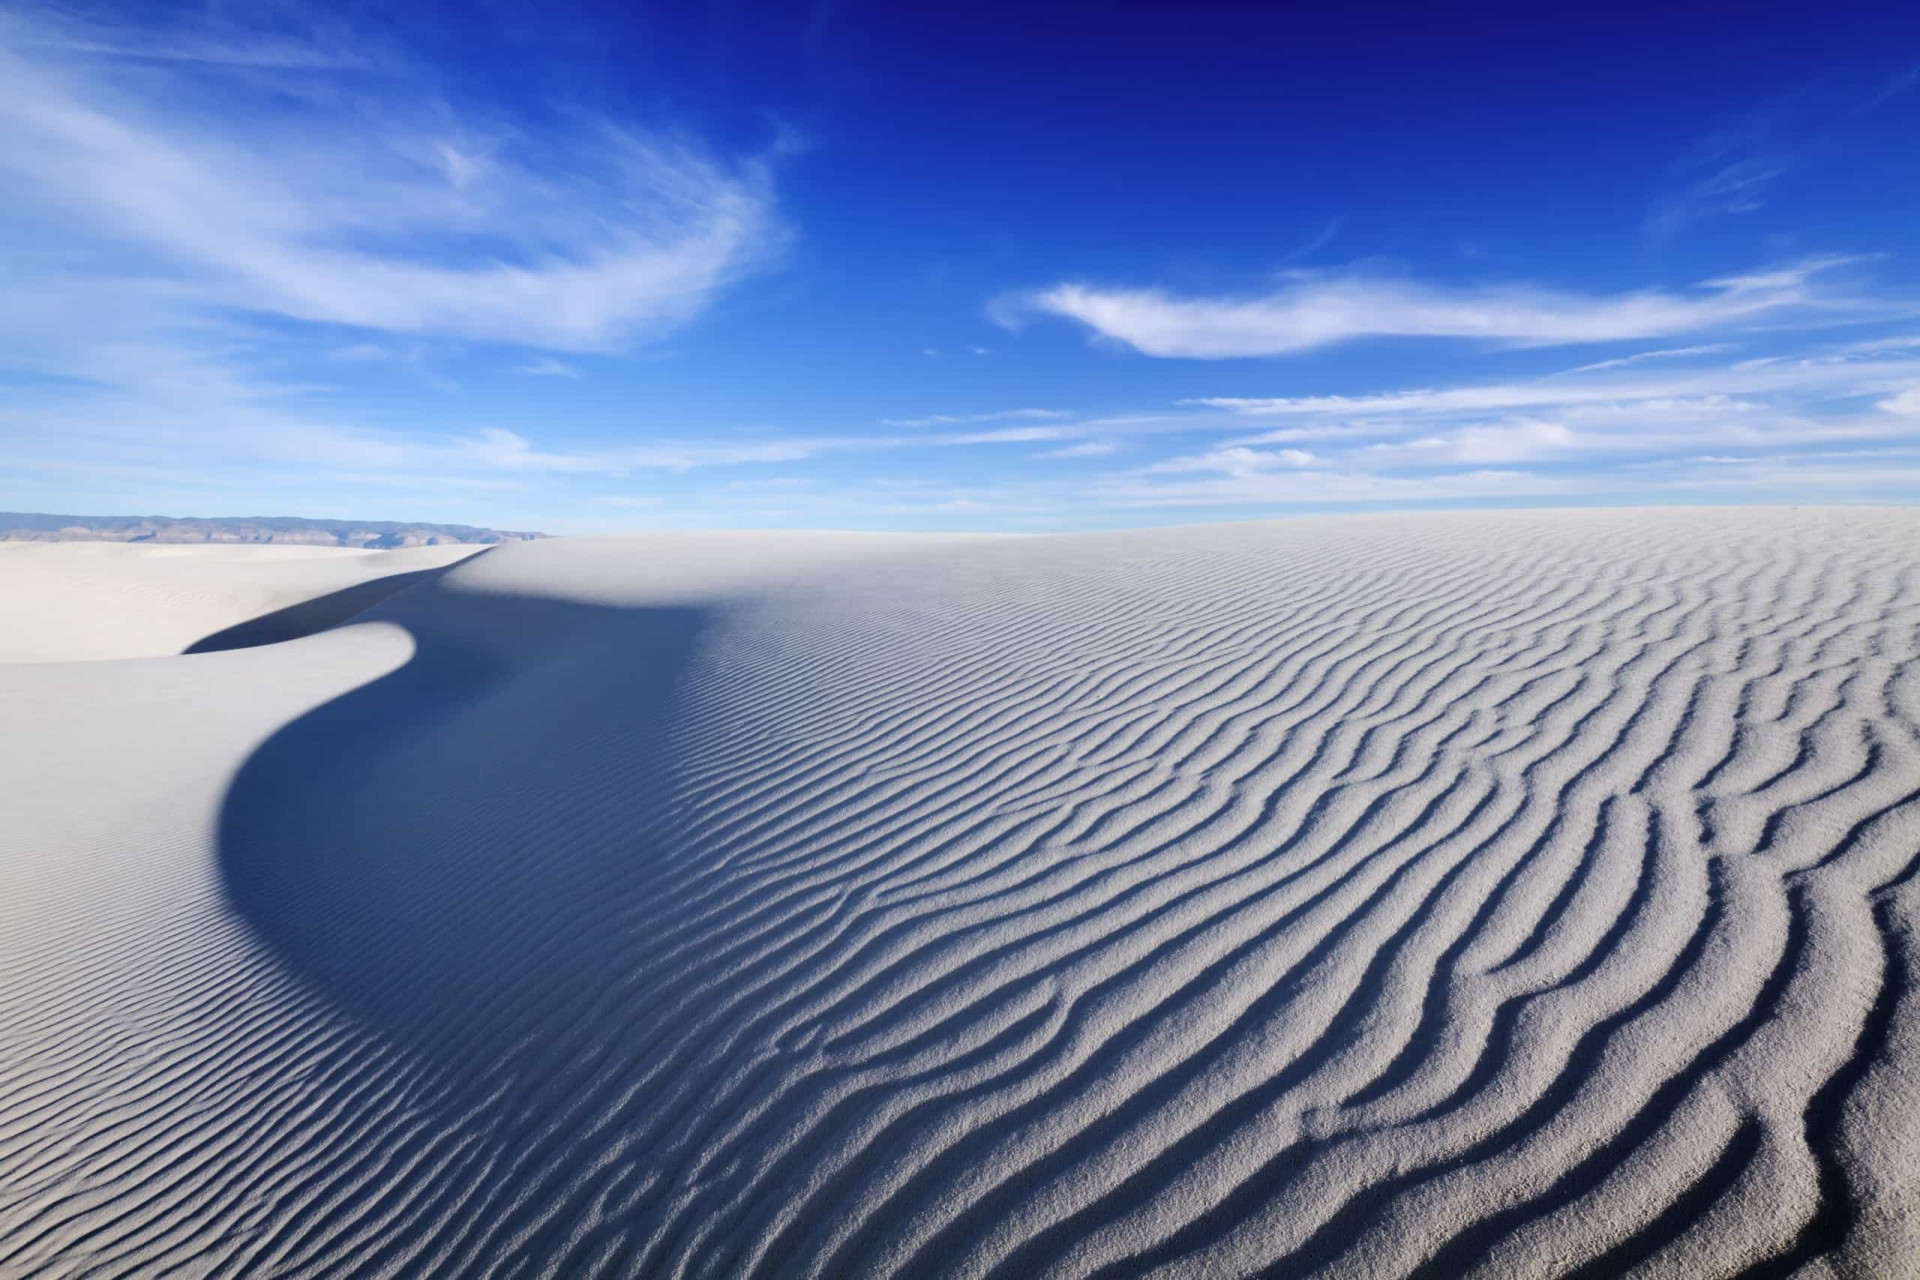 <p>Carpeting the south of New Mexico is the White Sands National Monument. It's a vast park of white sand dunes composed of gypsum crystals, and is the largest of its kind on Earth.</p>